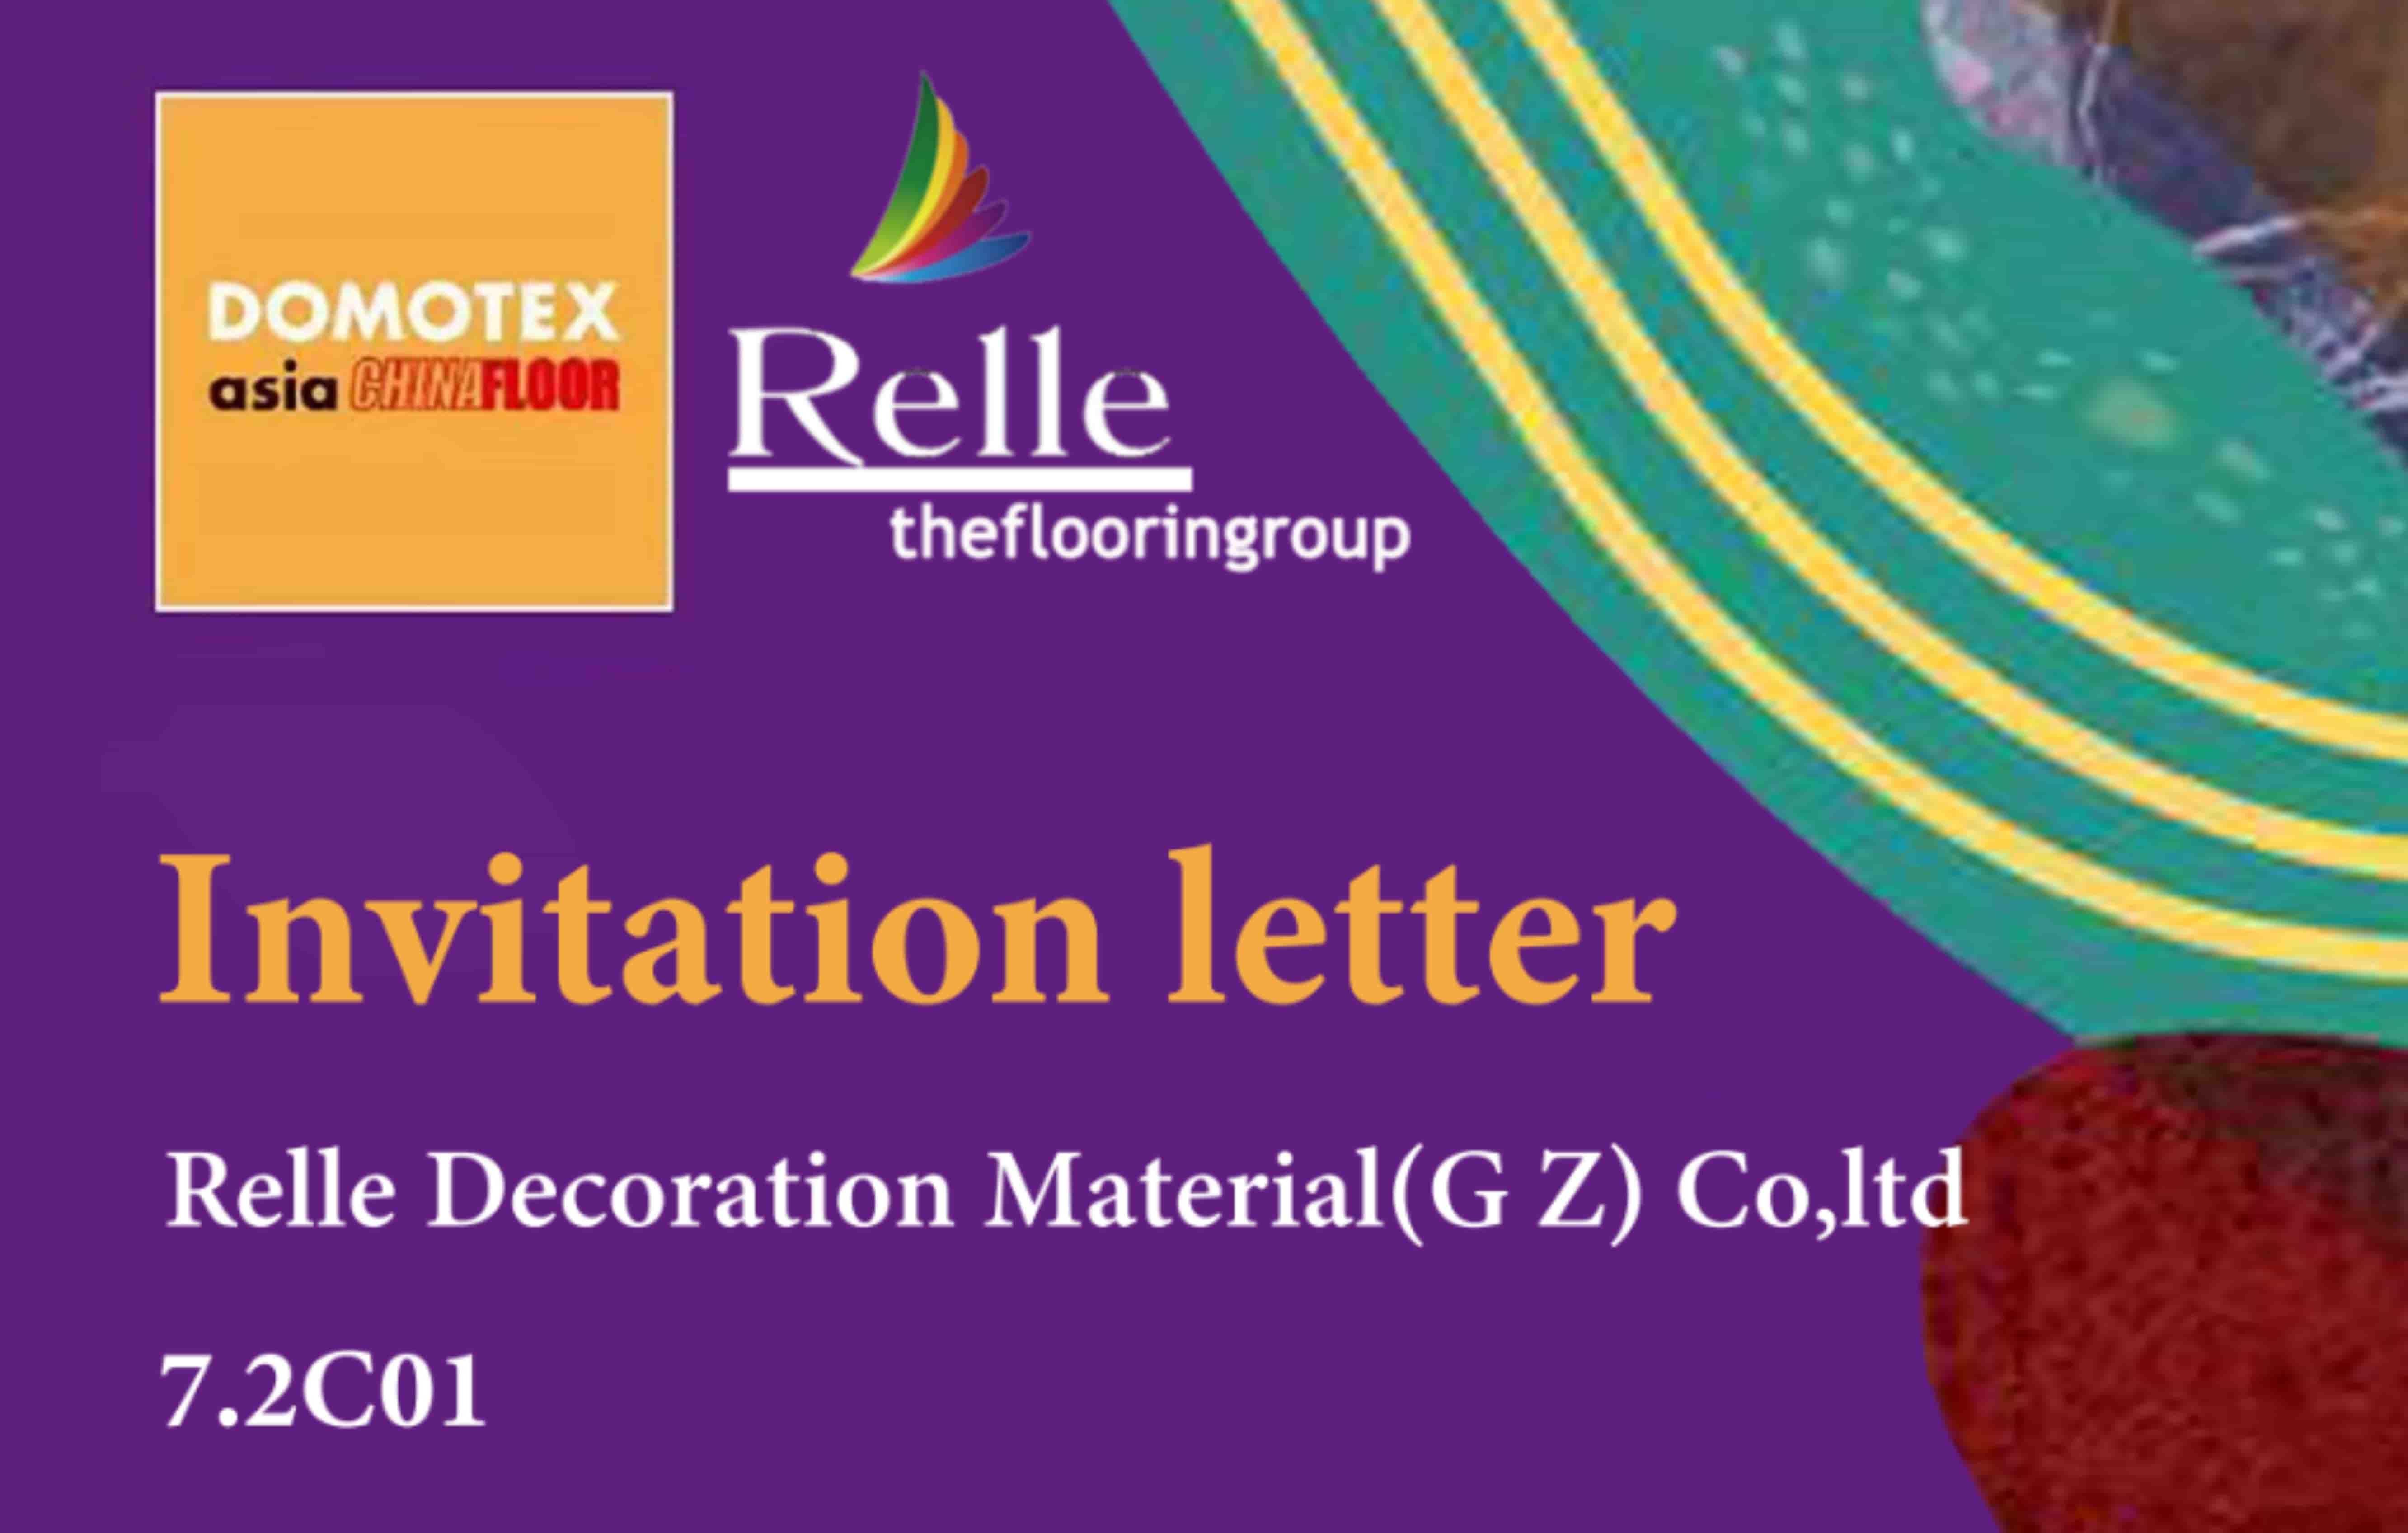 Welcome to Relleflor at Domotex Shanghai 